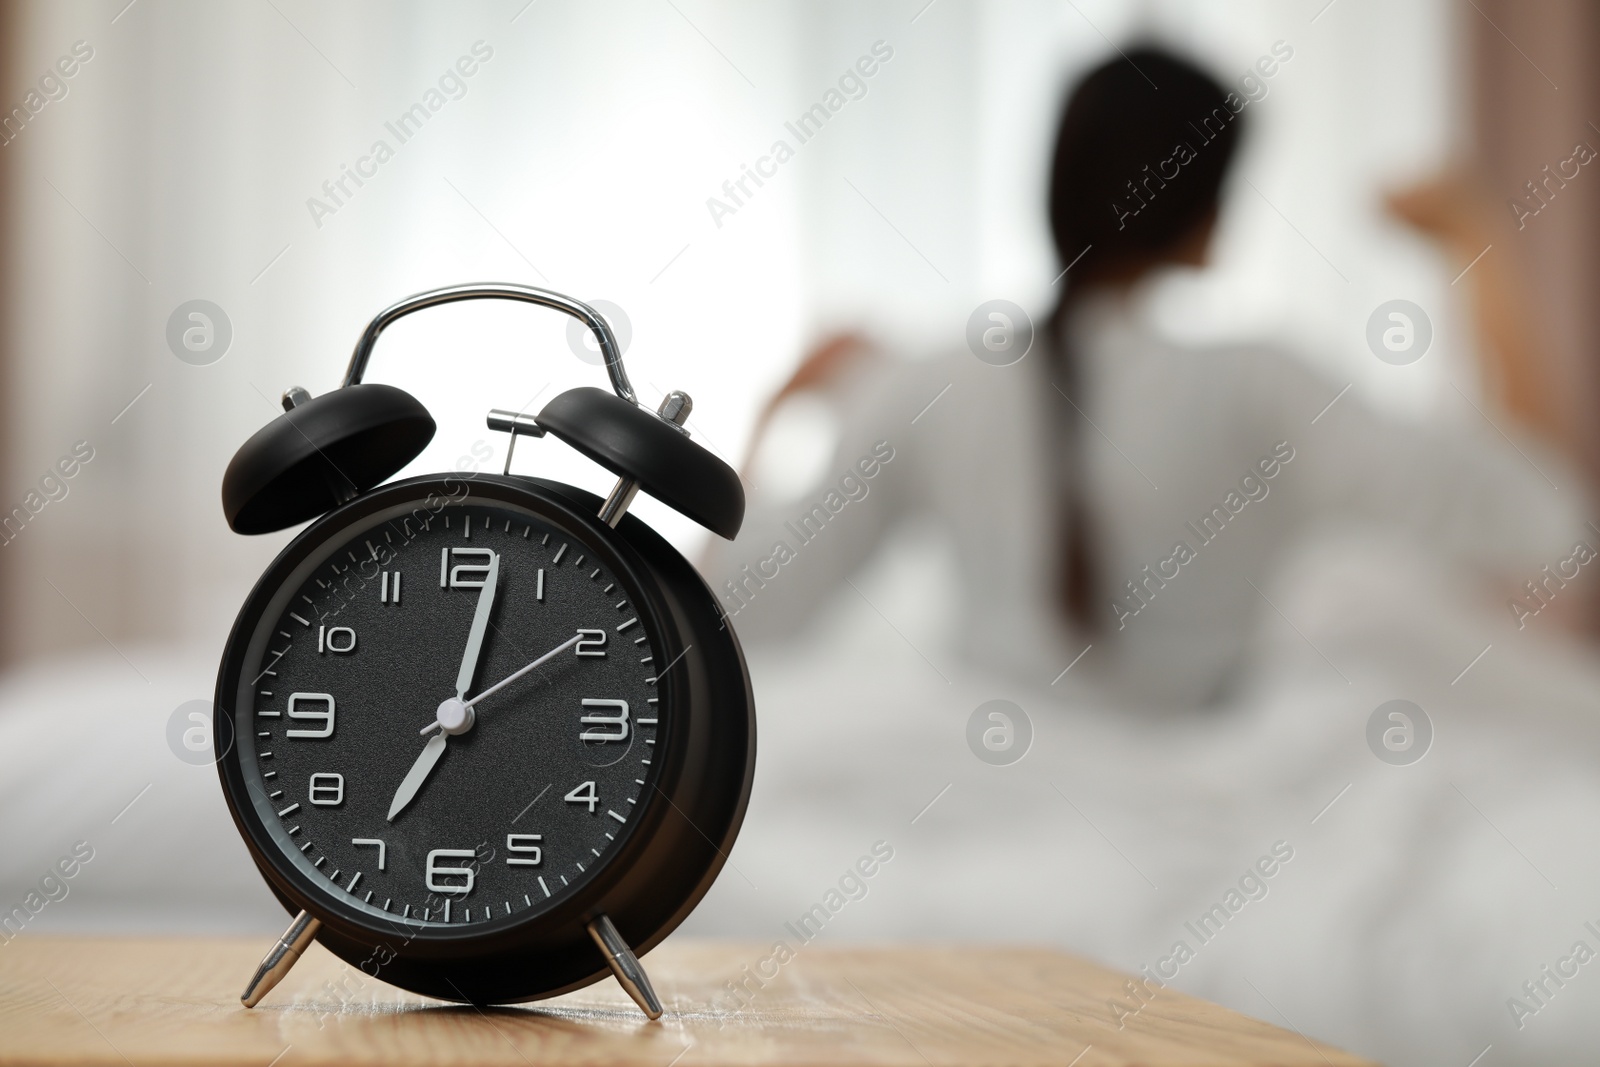 Photo of Woman stretching in bedroom, focus on alarm clock. Space for text